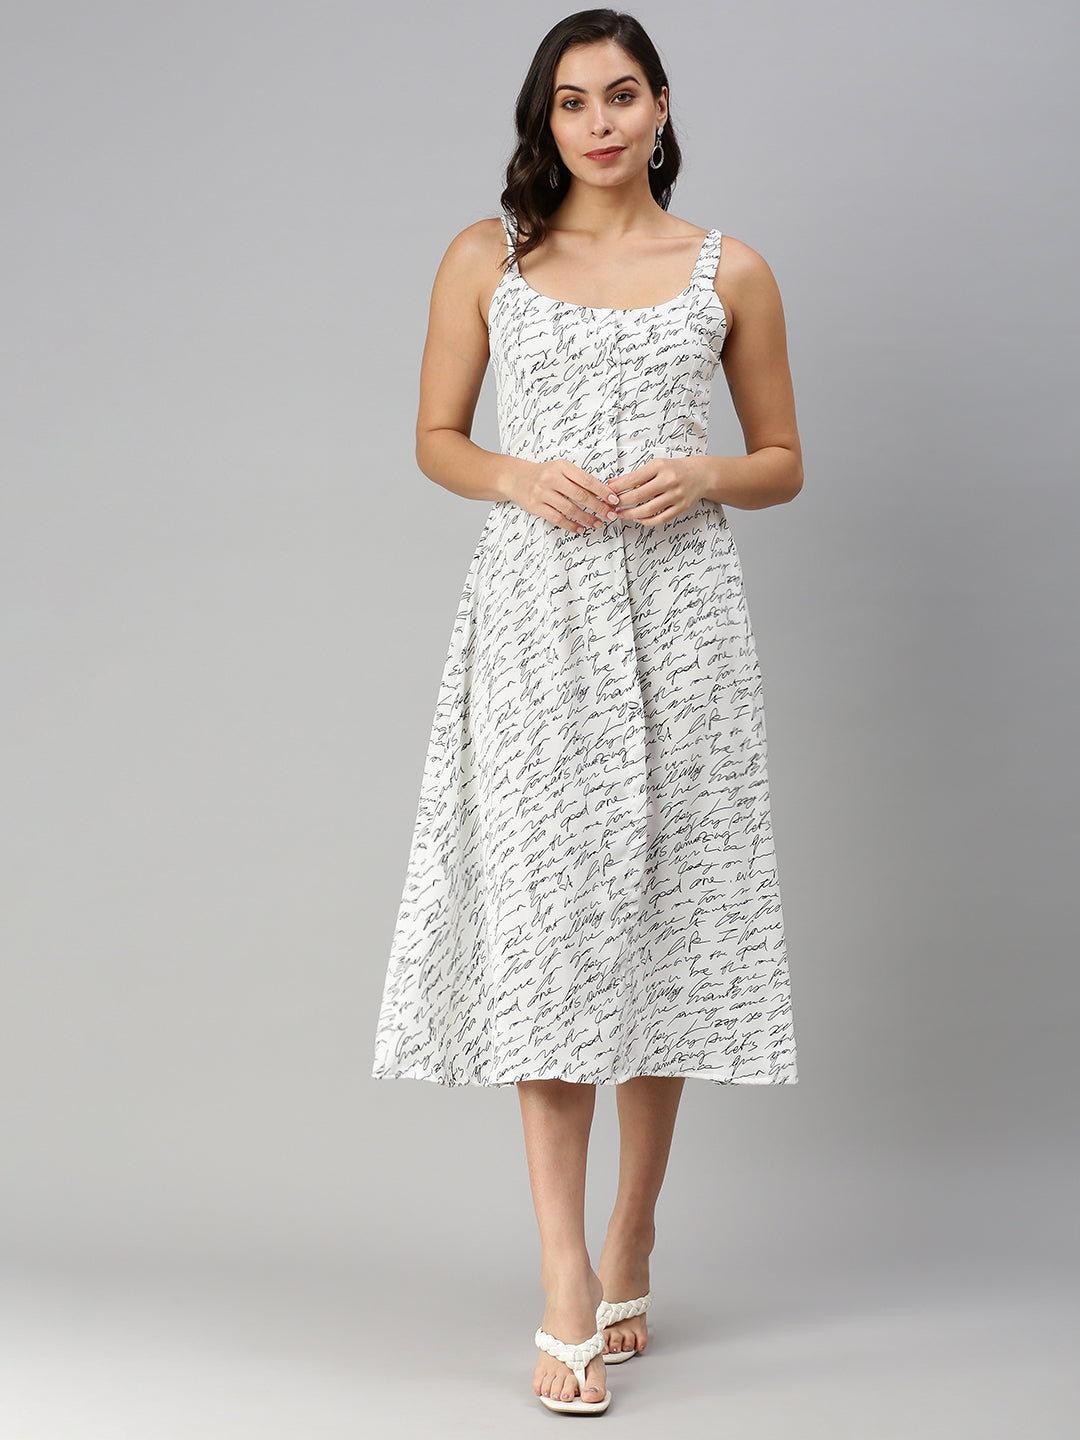 Women's Typography White Fit and Flare Dress